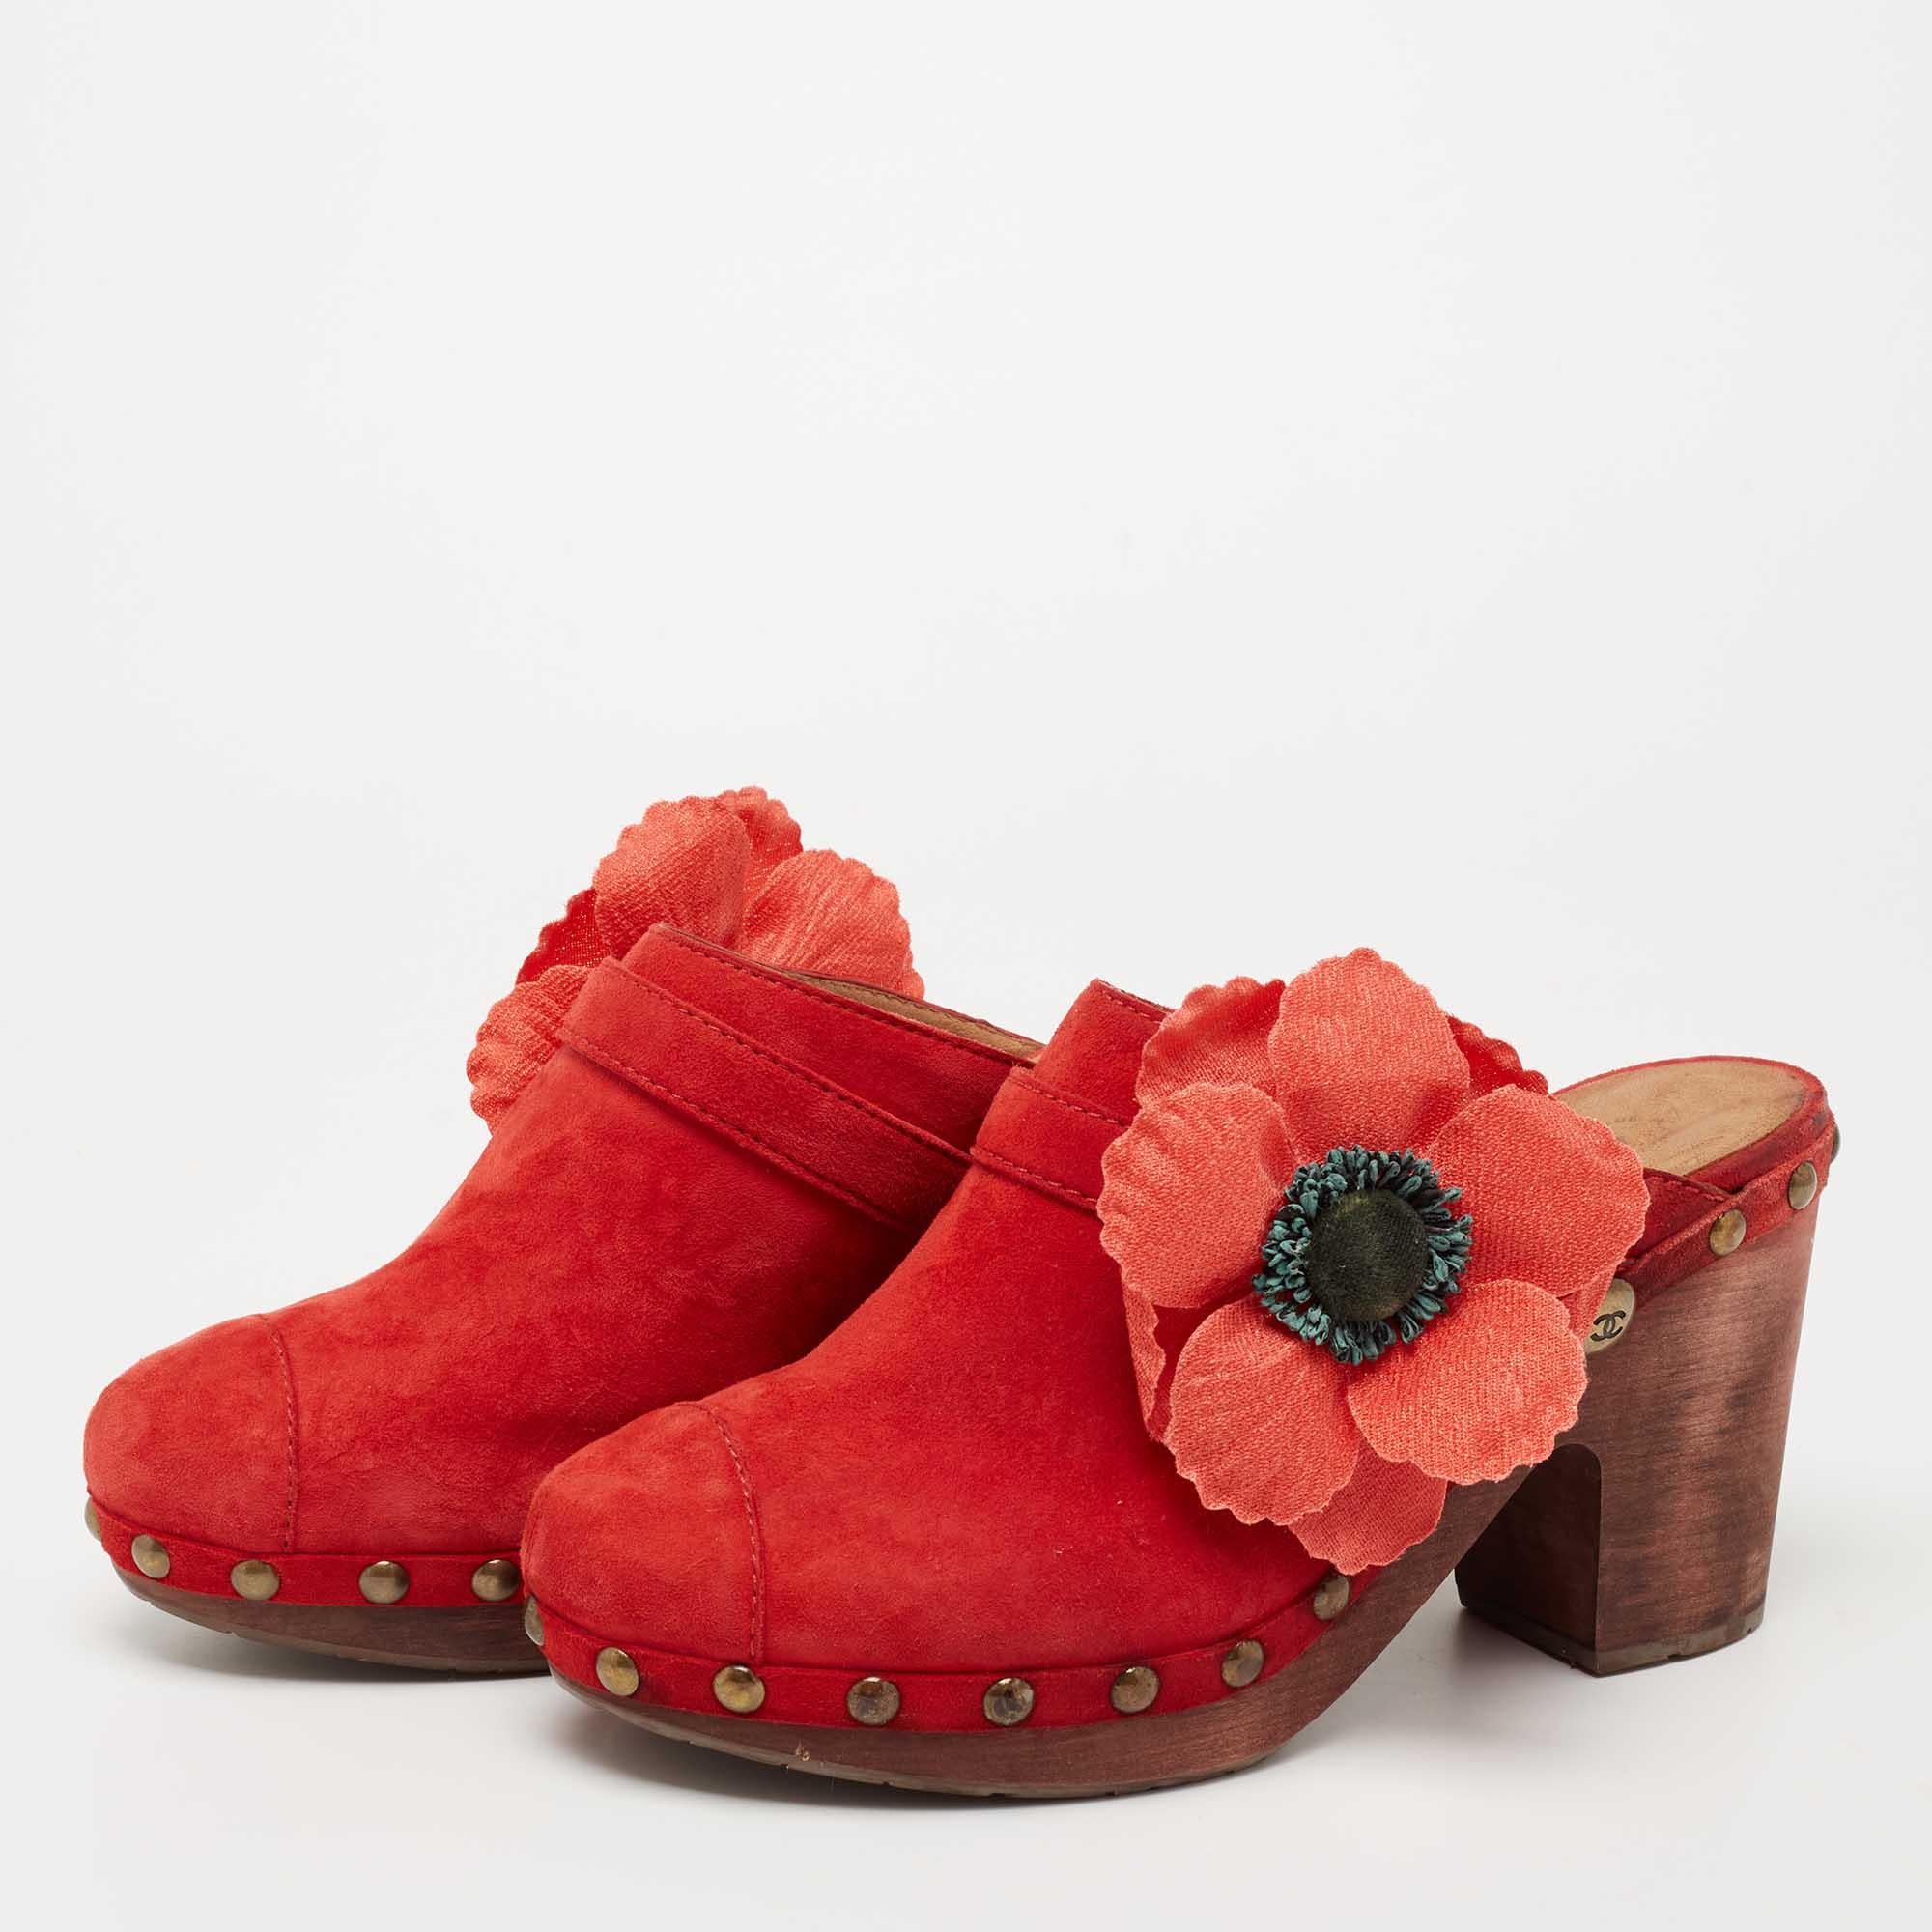 With a vintage and retro charm comes these Chanel clogs! Crafted from suede in a red shade, these beauties are elevated by floral motifs perched on the vamps. The block heels supported by sturdy platforms make them comfortable to wear all day long.

